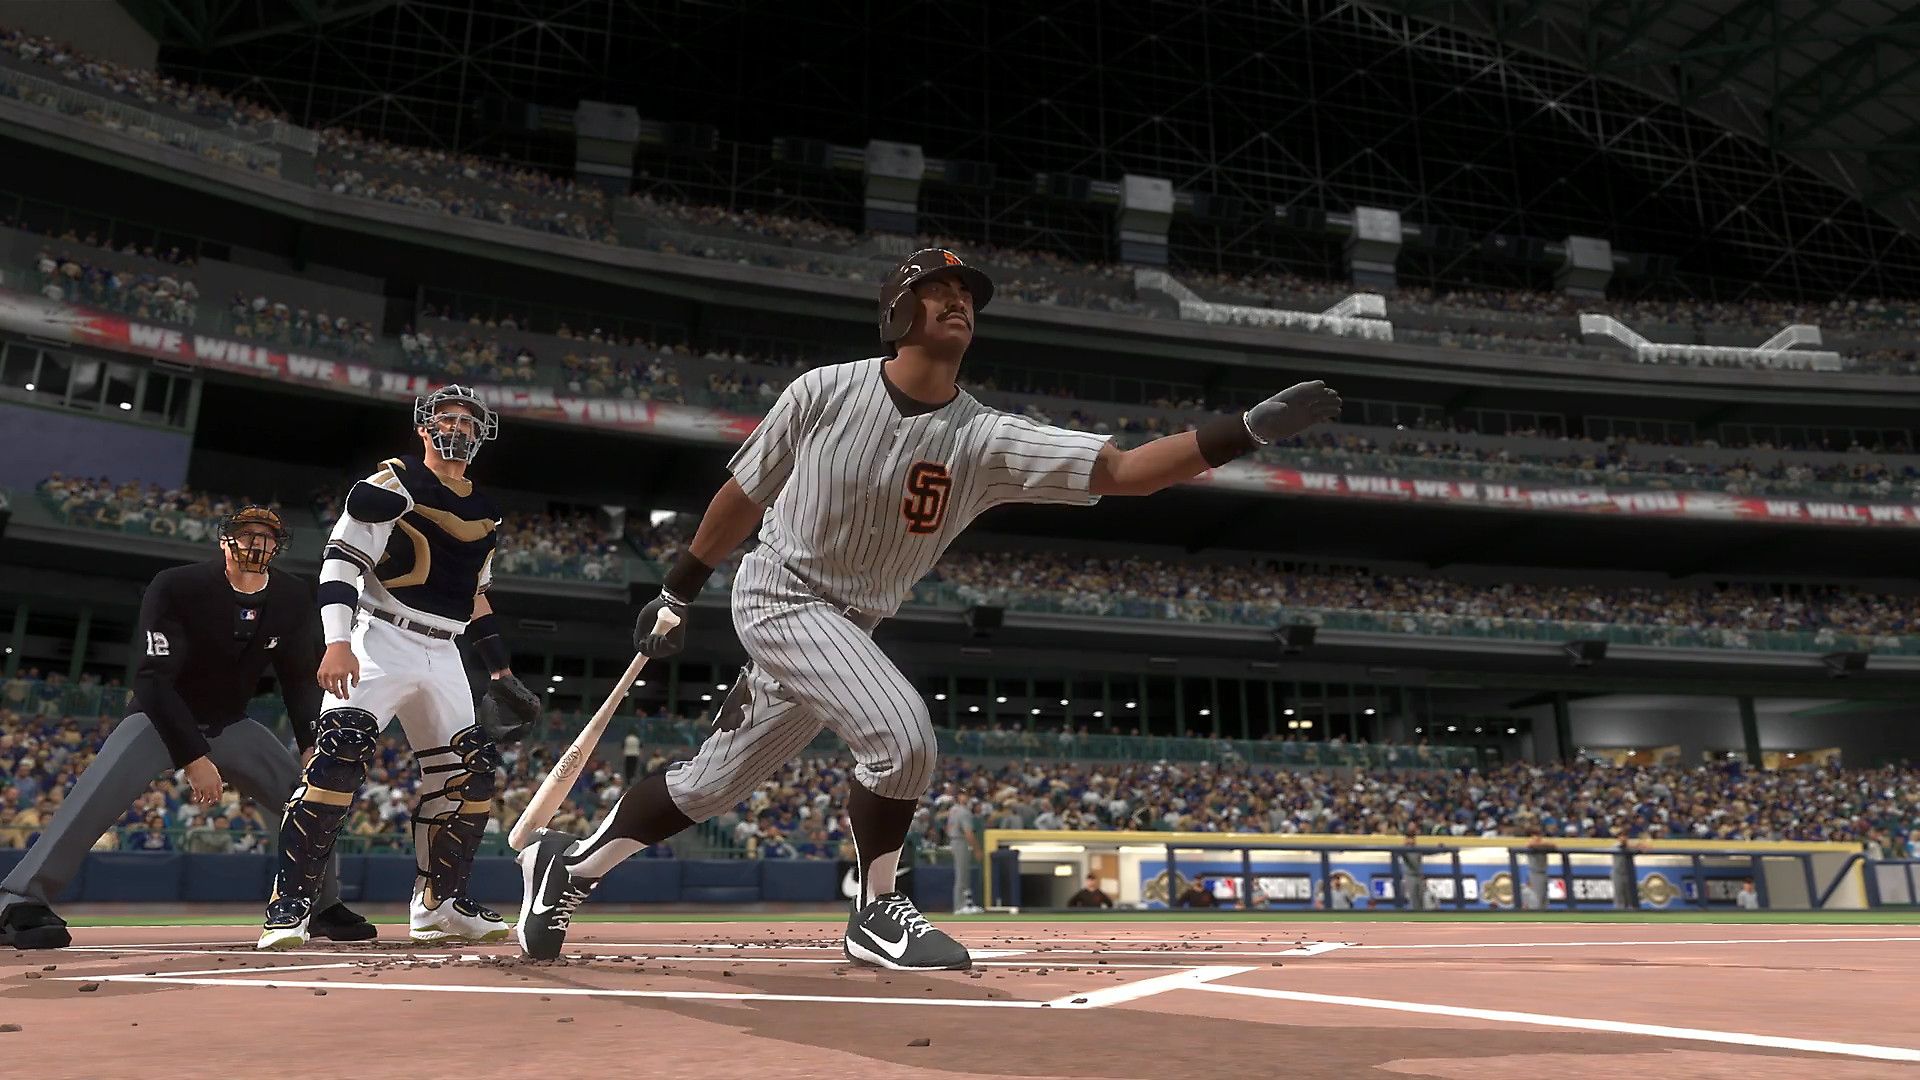 mlb the show ps4 discount code